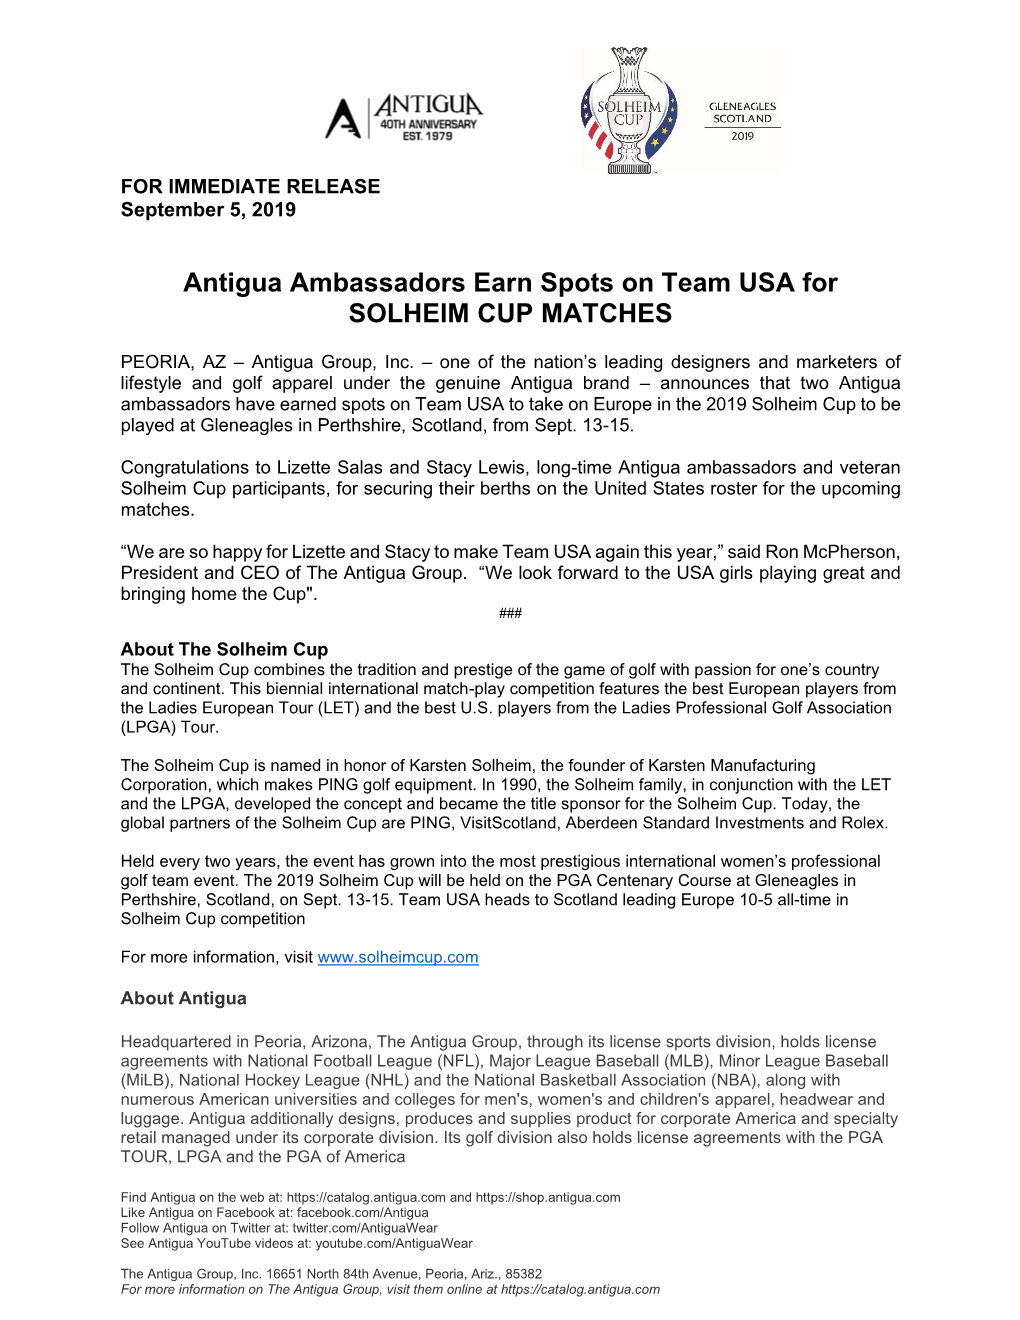 Antigua Ambassadors Earn Spots on Team USA for SOLHEIM CUP MATCHES